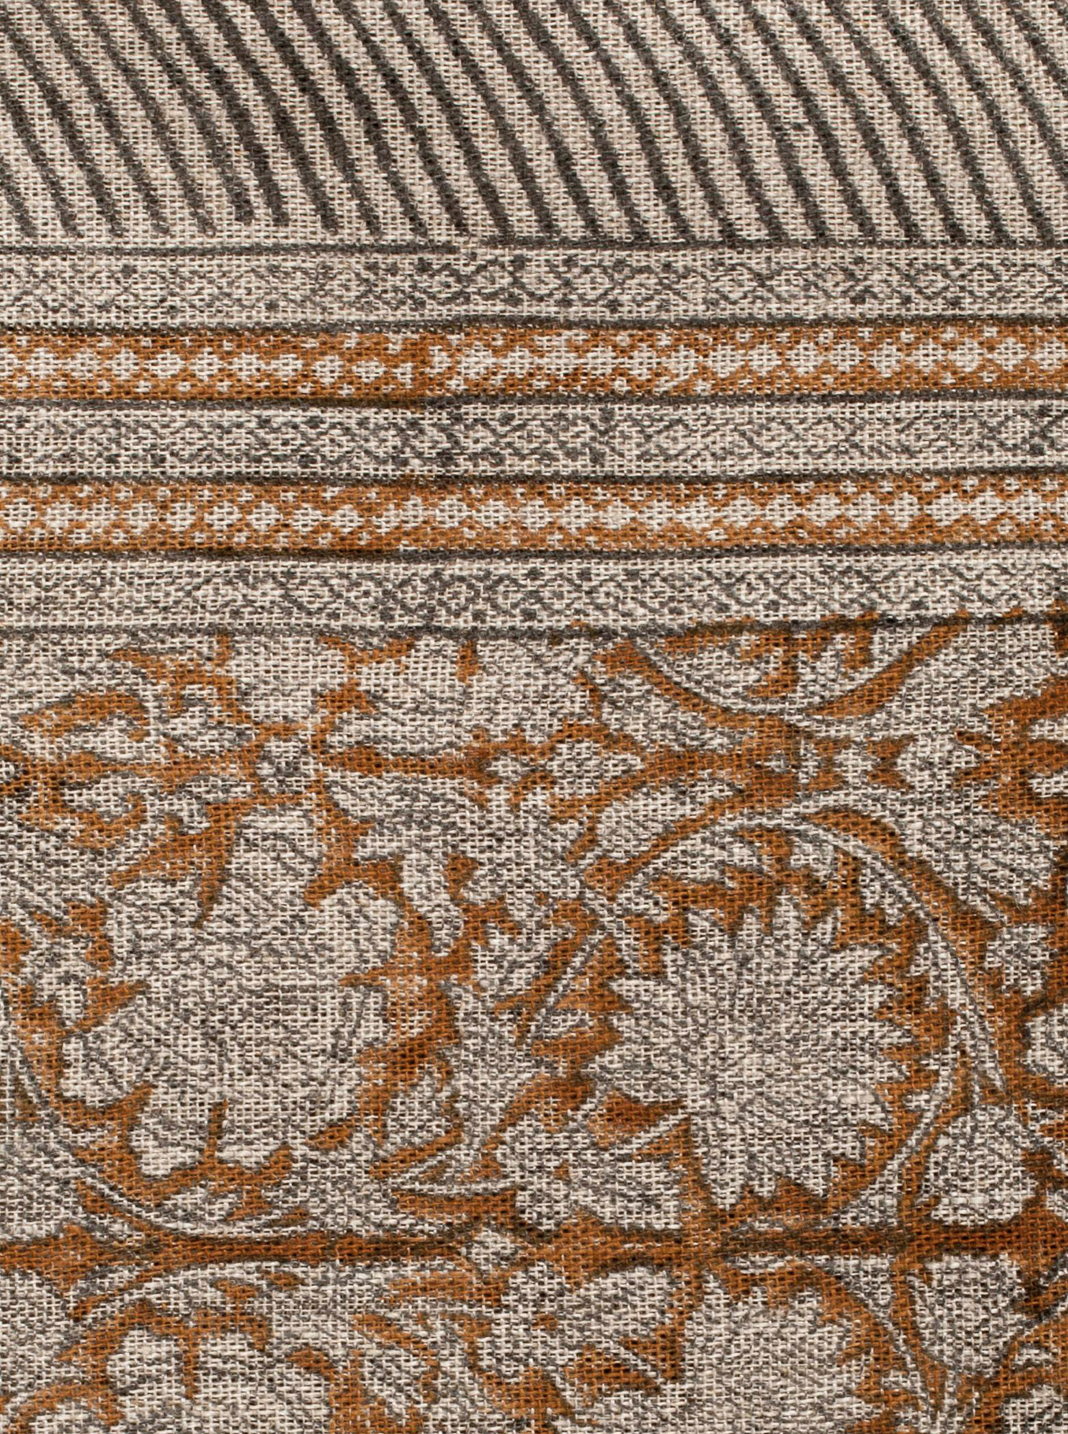 Linen tablecloth with Paradise print in Ochre